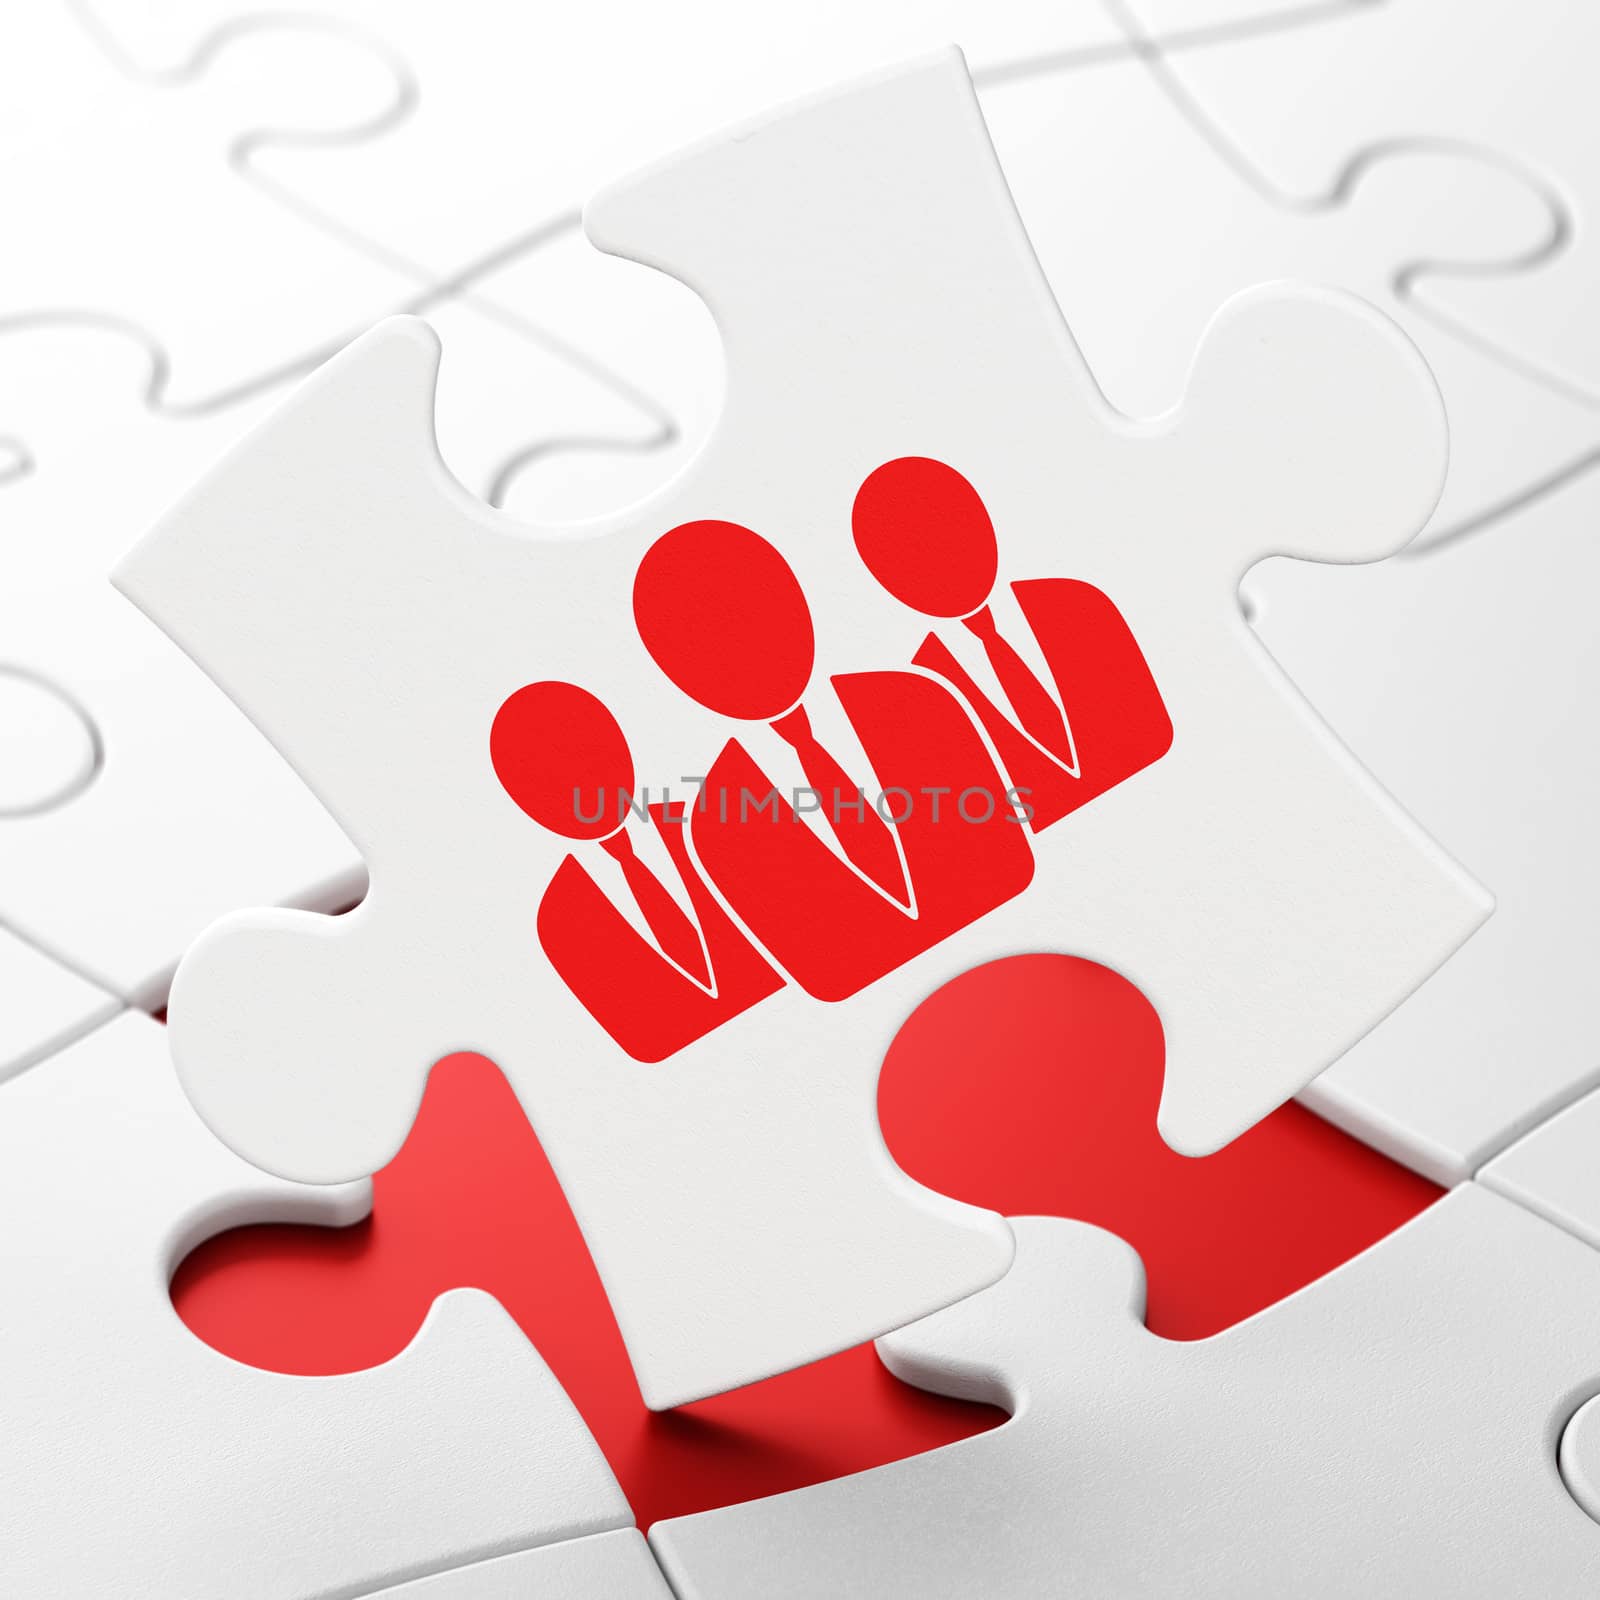 Finance concept: Business People on White puzzle pieces background, 3d render